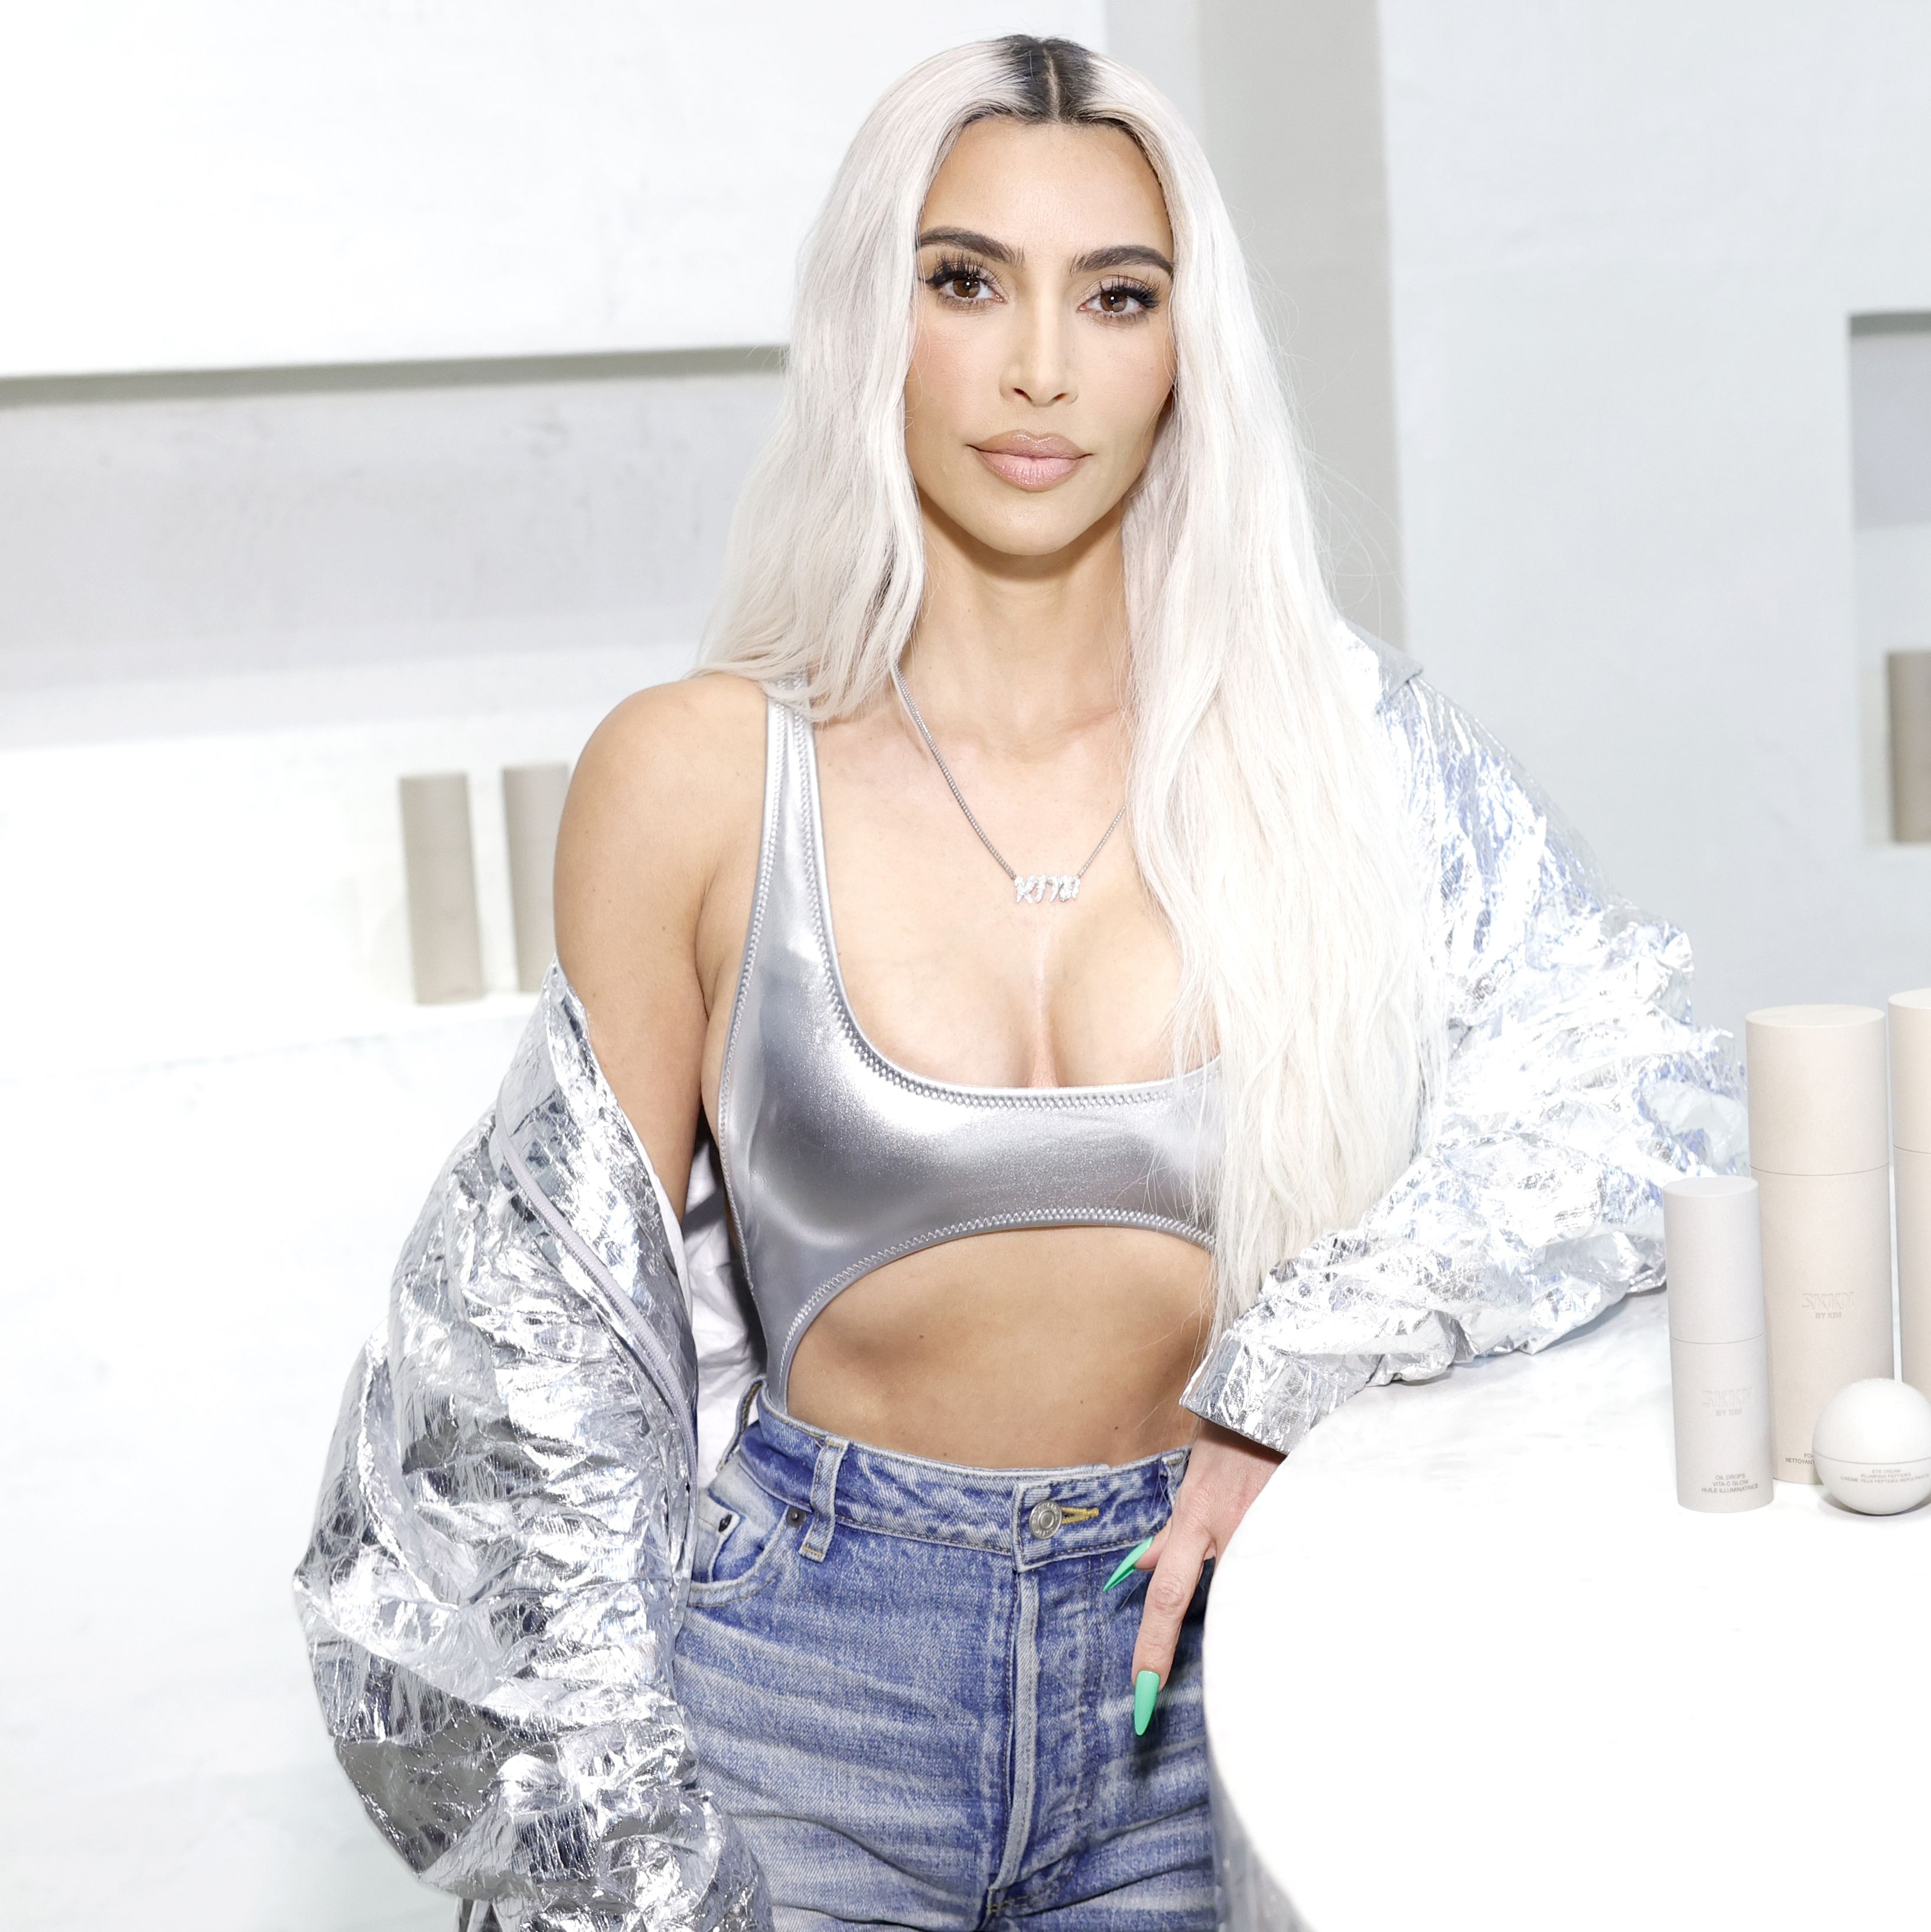 Kim Kardashian Shows What Her Natural Hair Looks Like Without Extensions